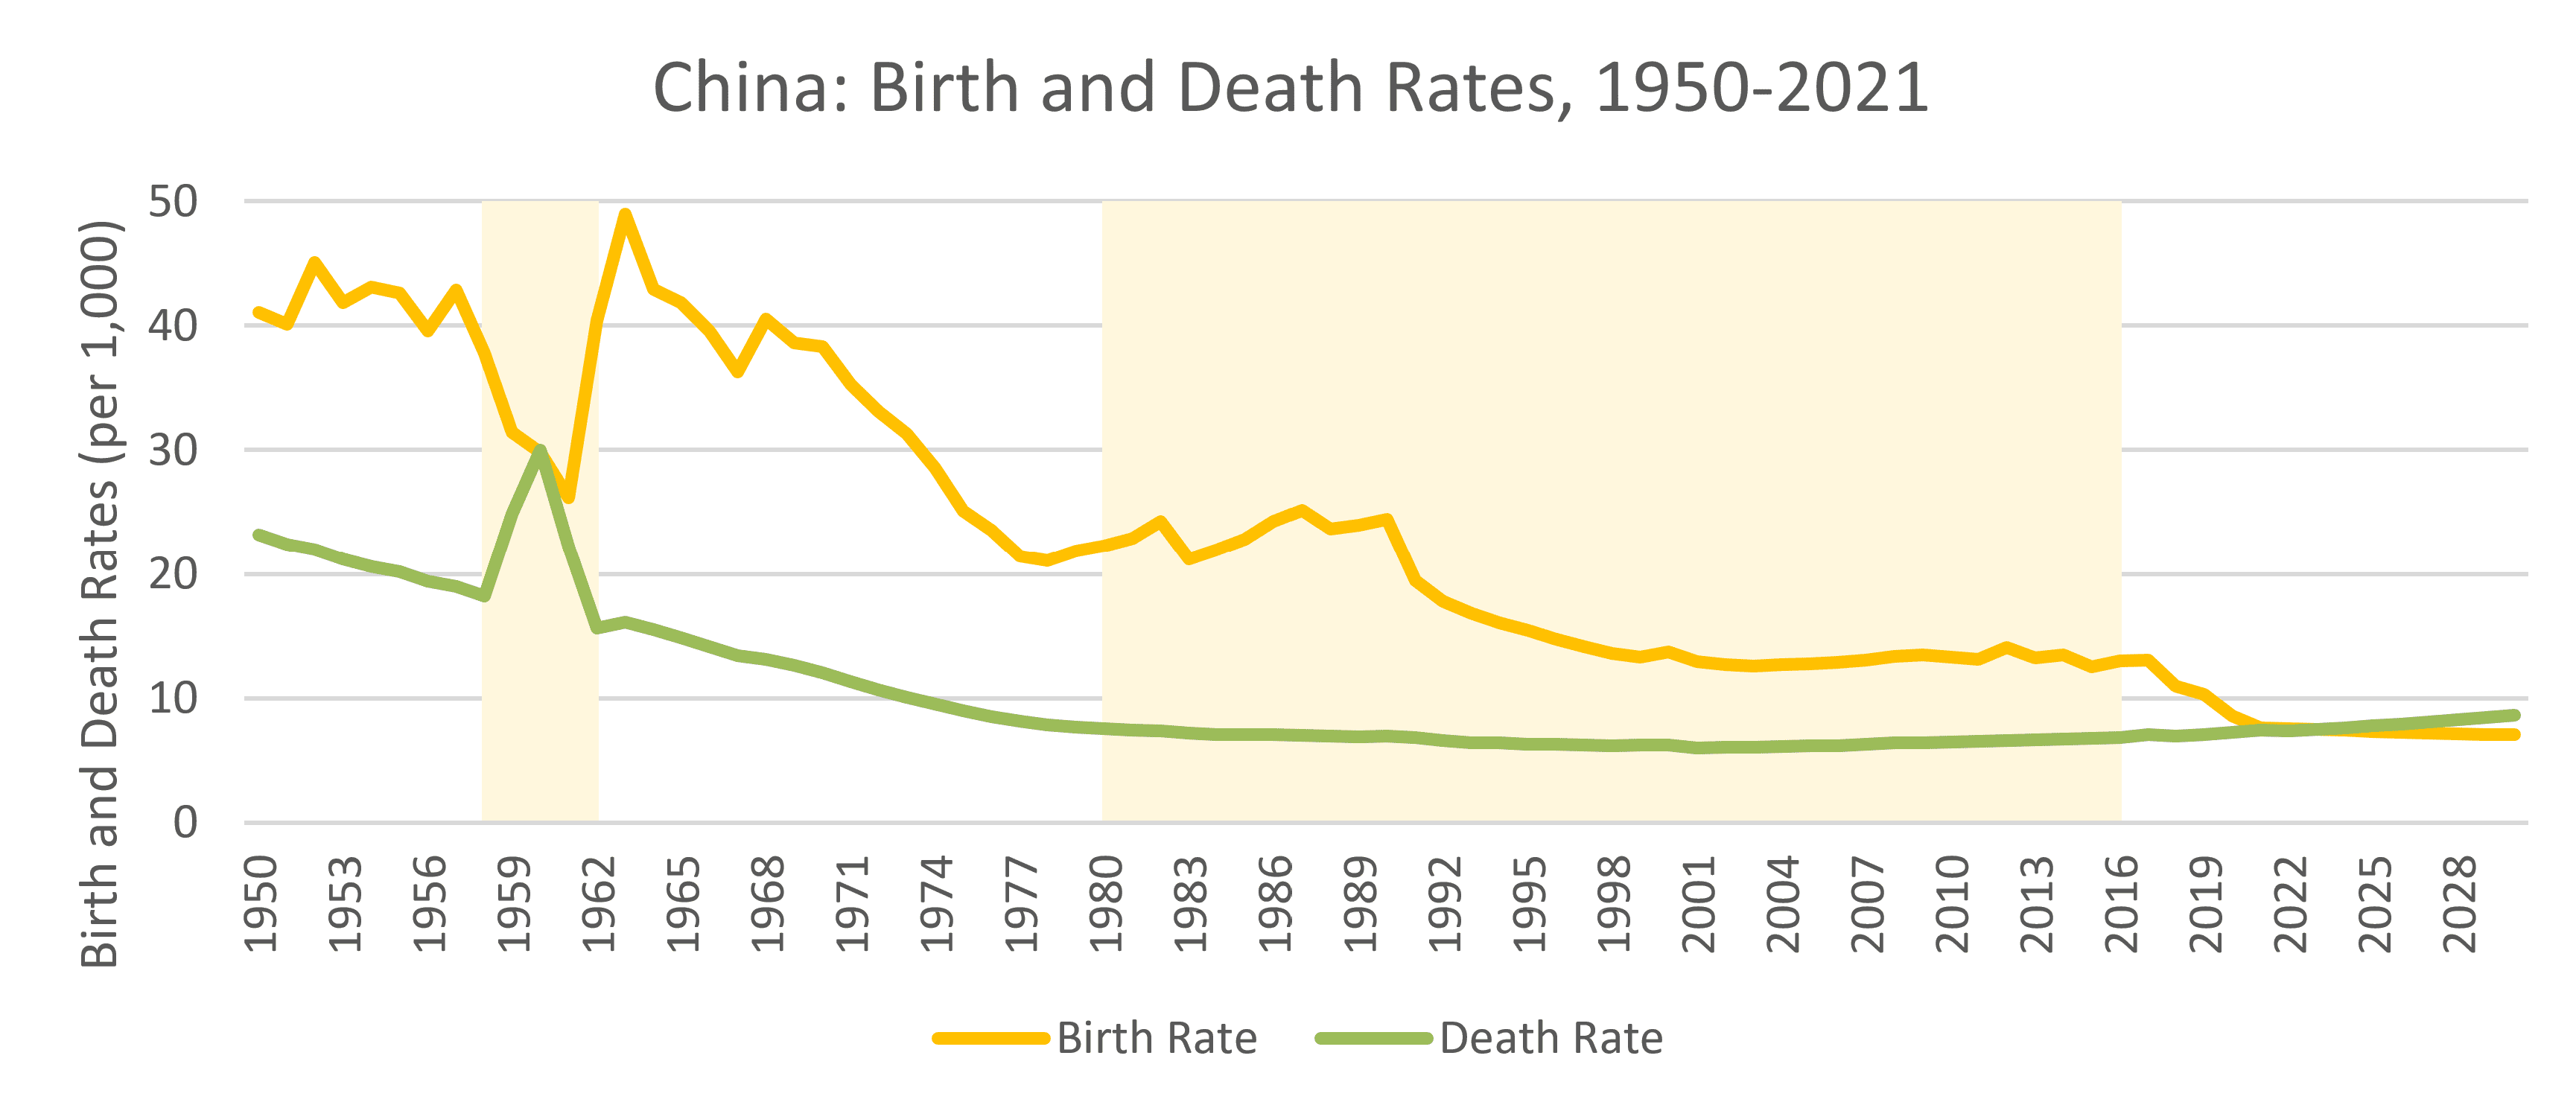 Birth and death rates in China.